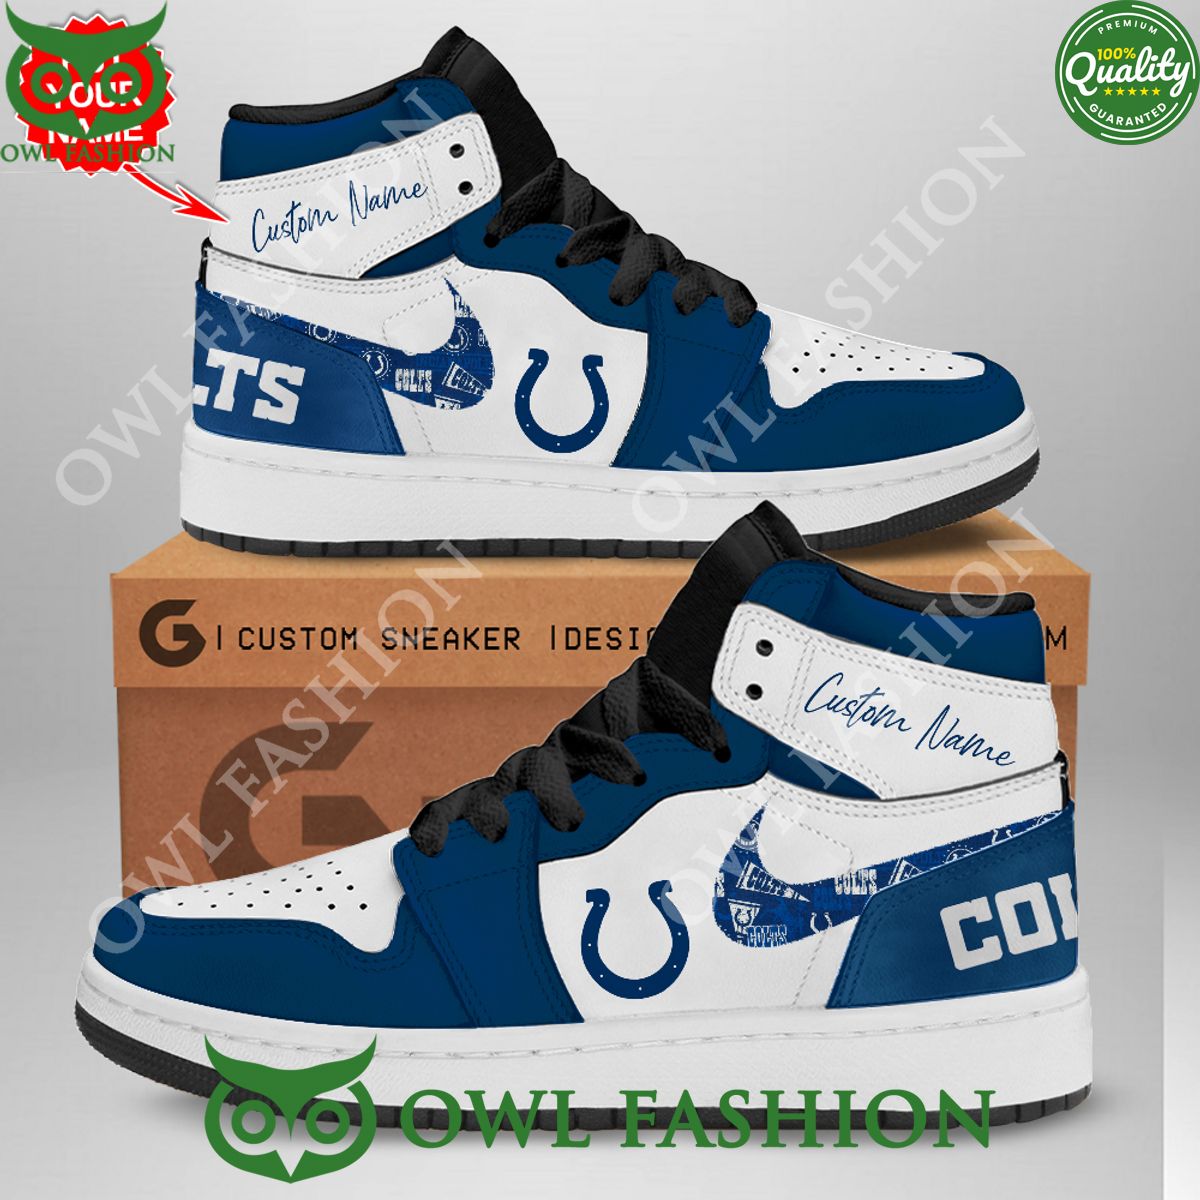 Customized Indianapolis Colts Air Jordan Limited